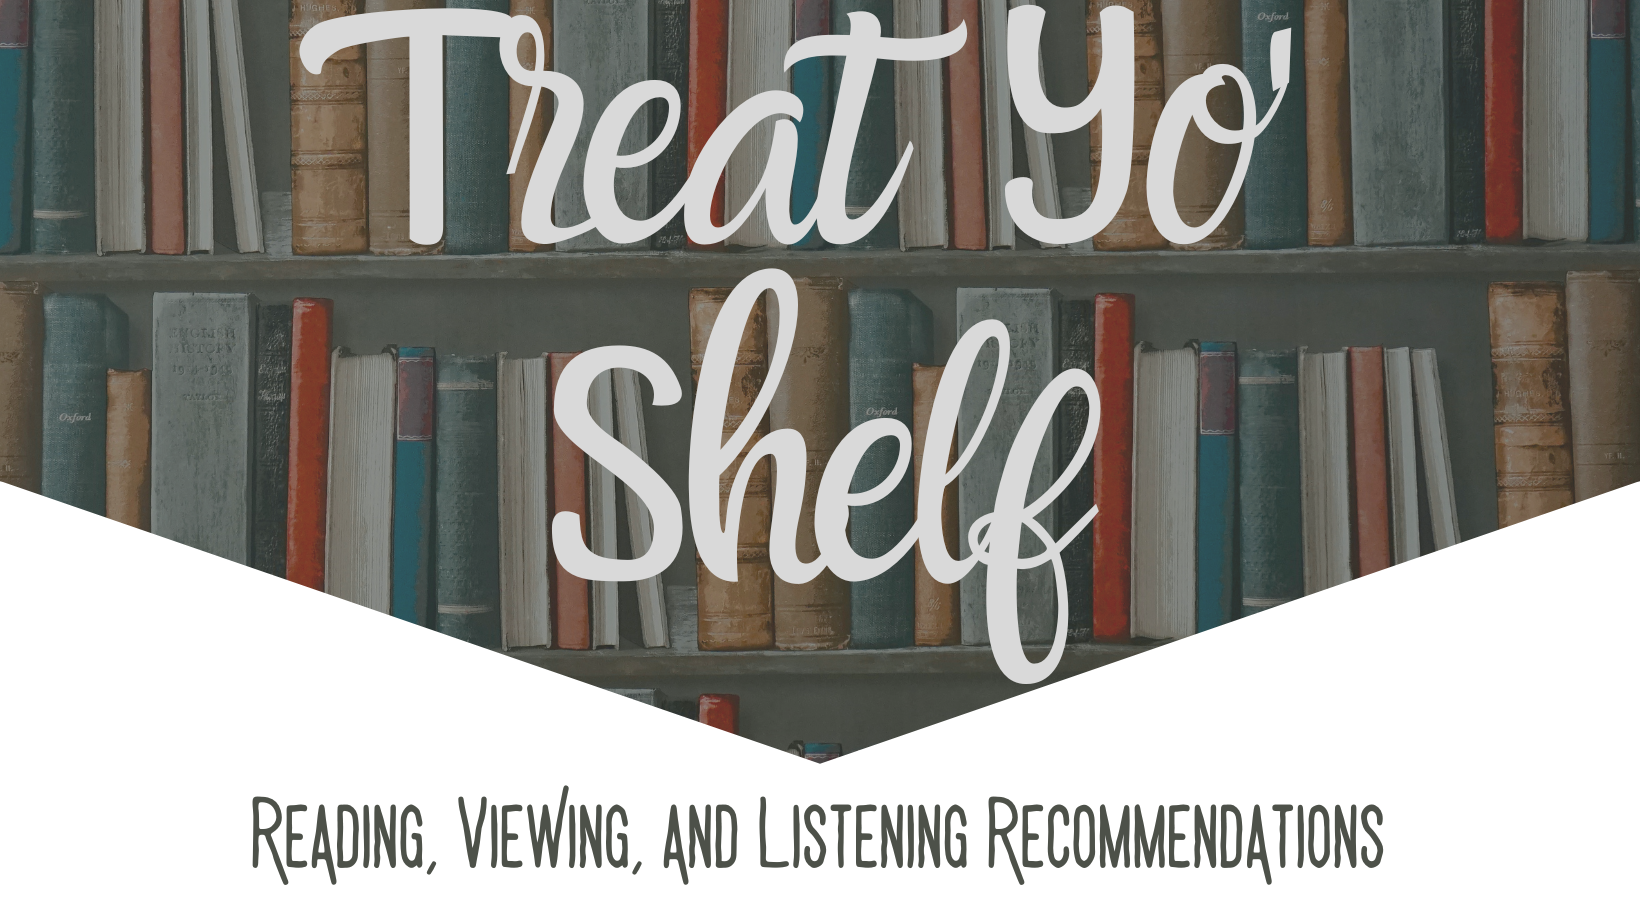 Treat your shelf - Reading, viewing, and listening recommendations